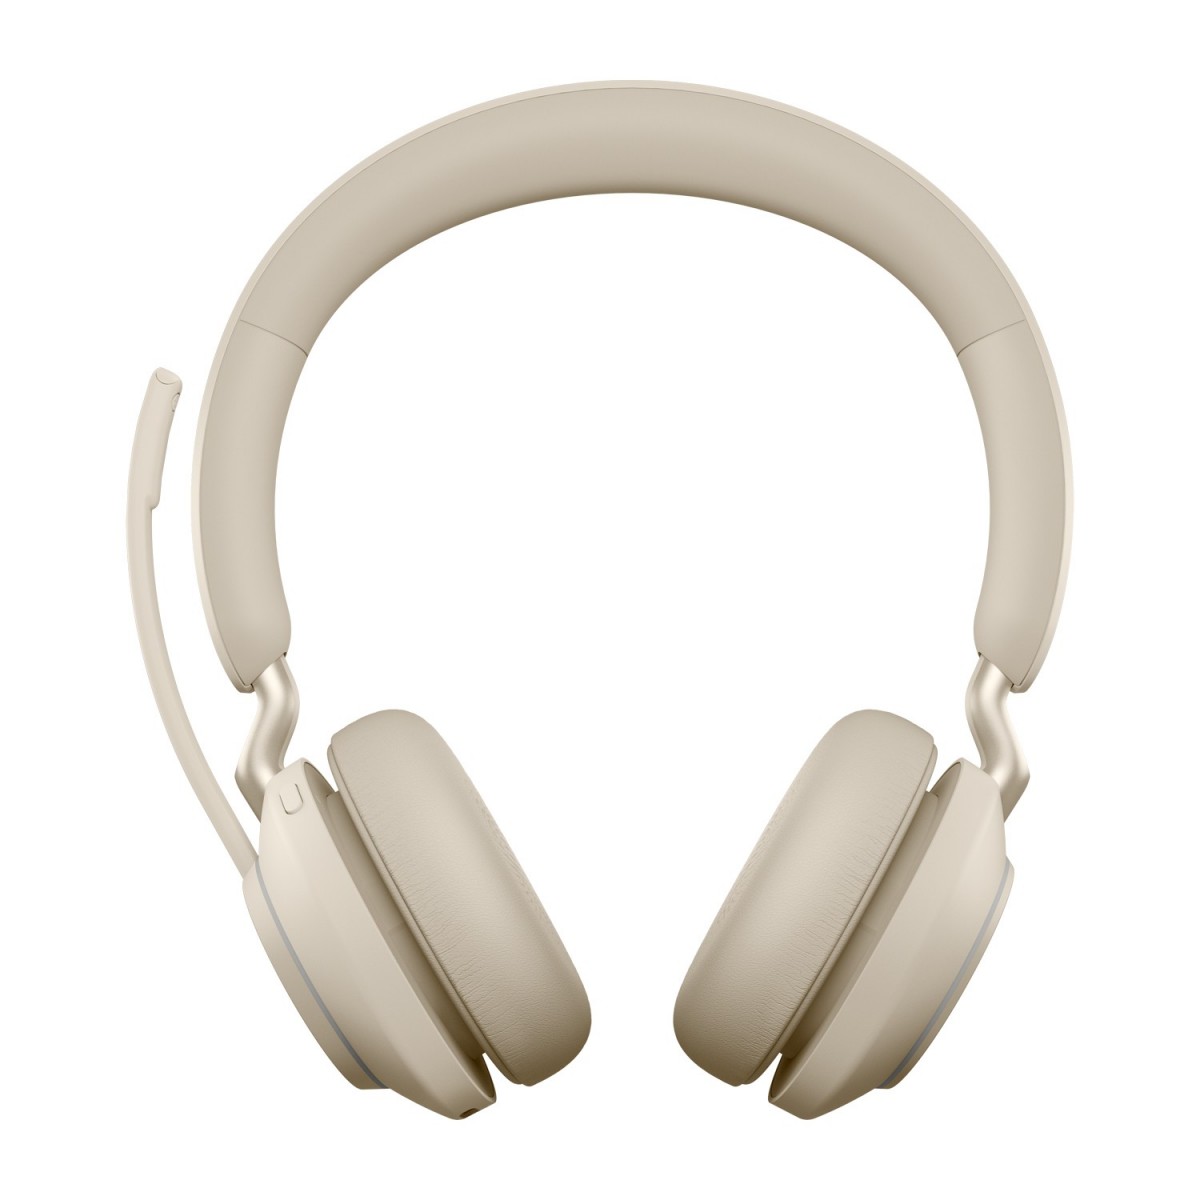 Jabra Evolve2 65 - MS Stereo - Headset - Head-band - Office/Call center - Beige - Binaural - Bluetooth pairing - Play/Pause - Tr